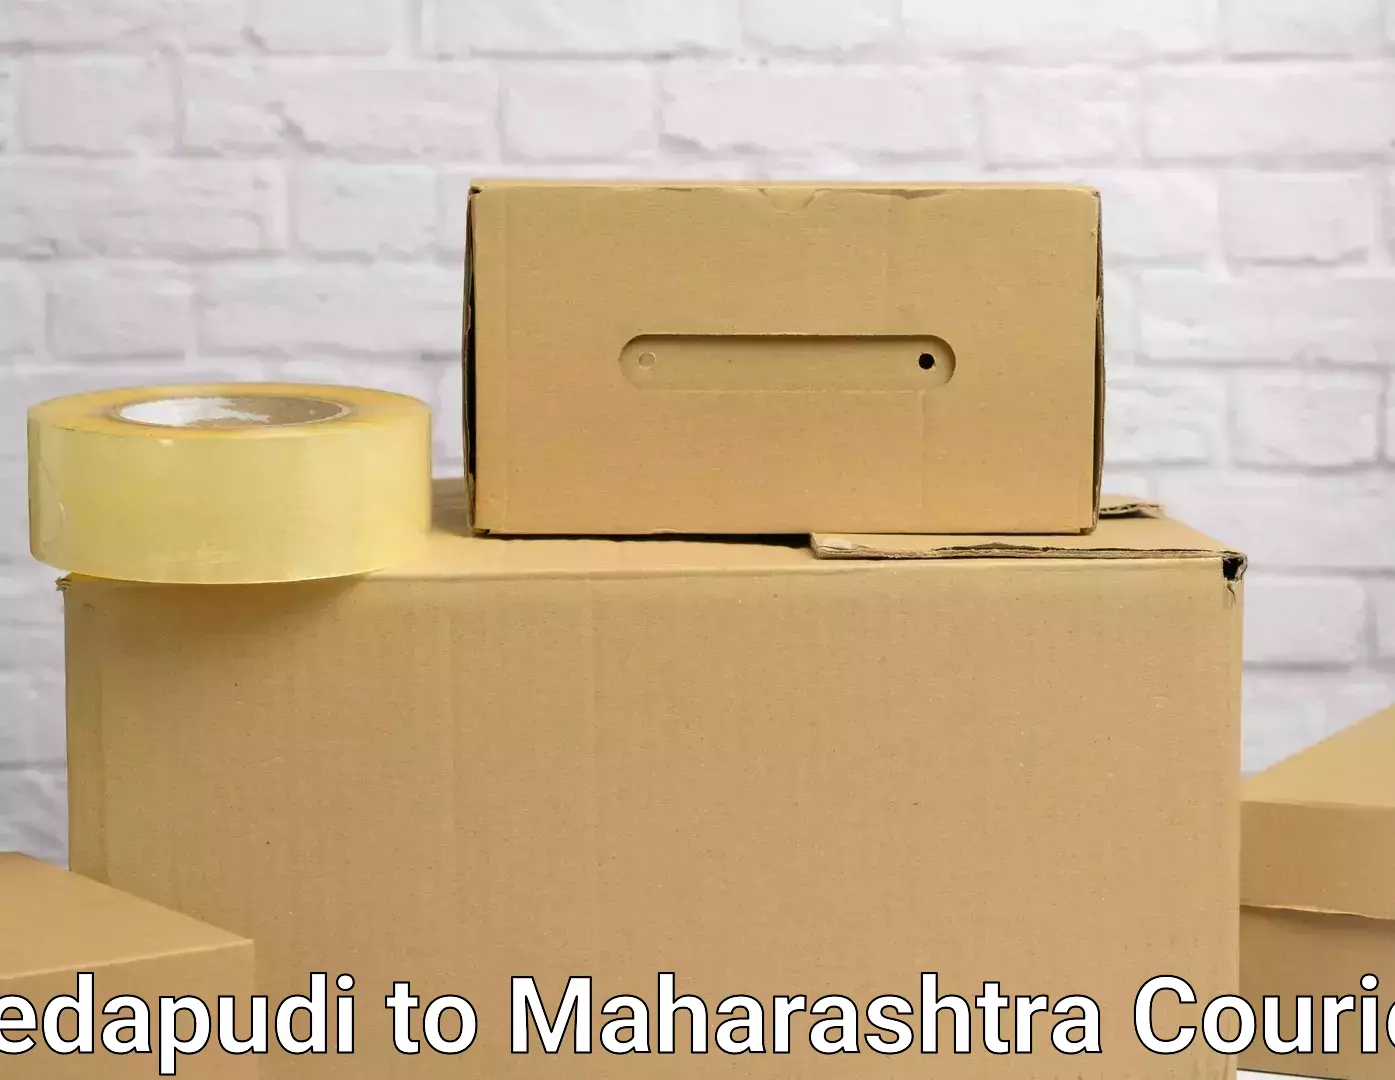 Trusted relocation experts Pedapudi to Worli